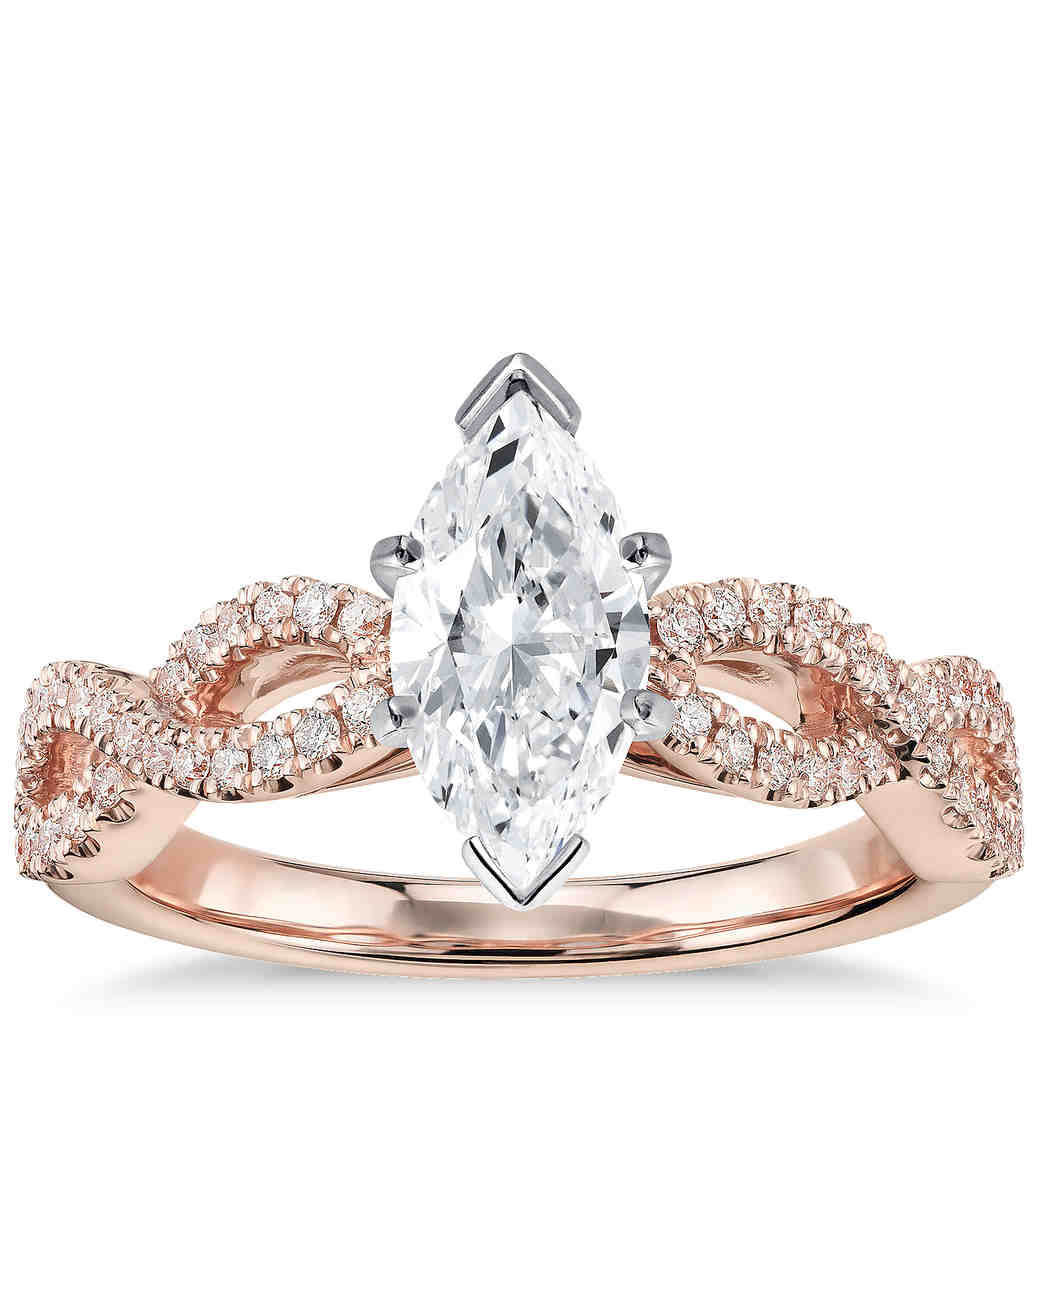 Marquise Cut Diamond Engagement Ring
 Marquise Cut Diamond Engagement Rings